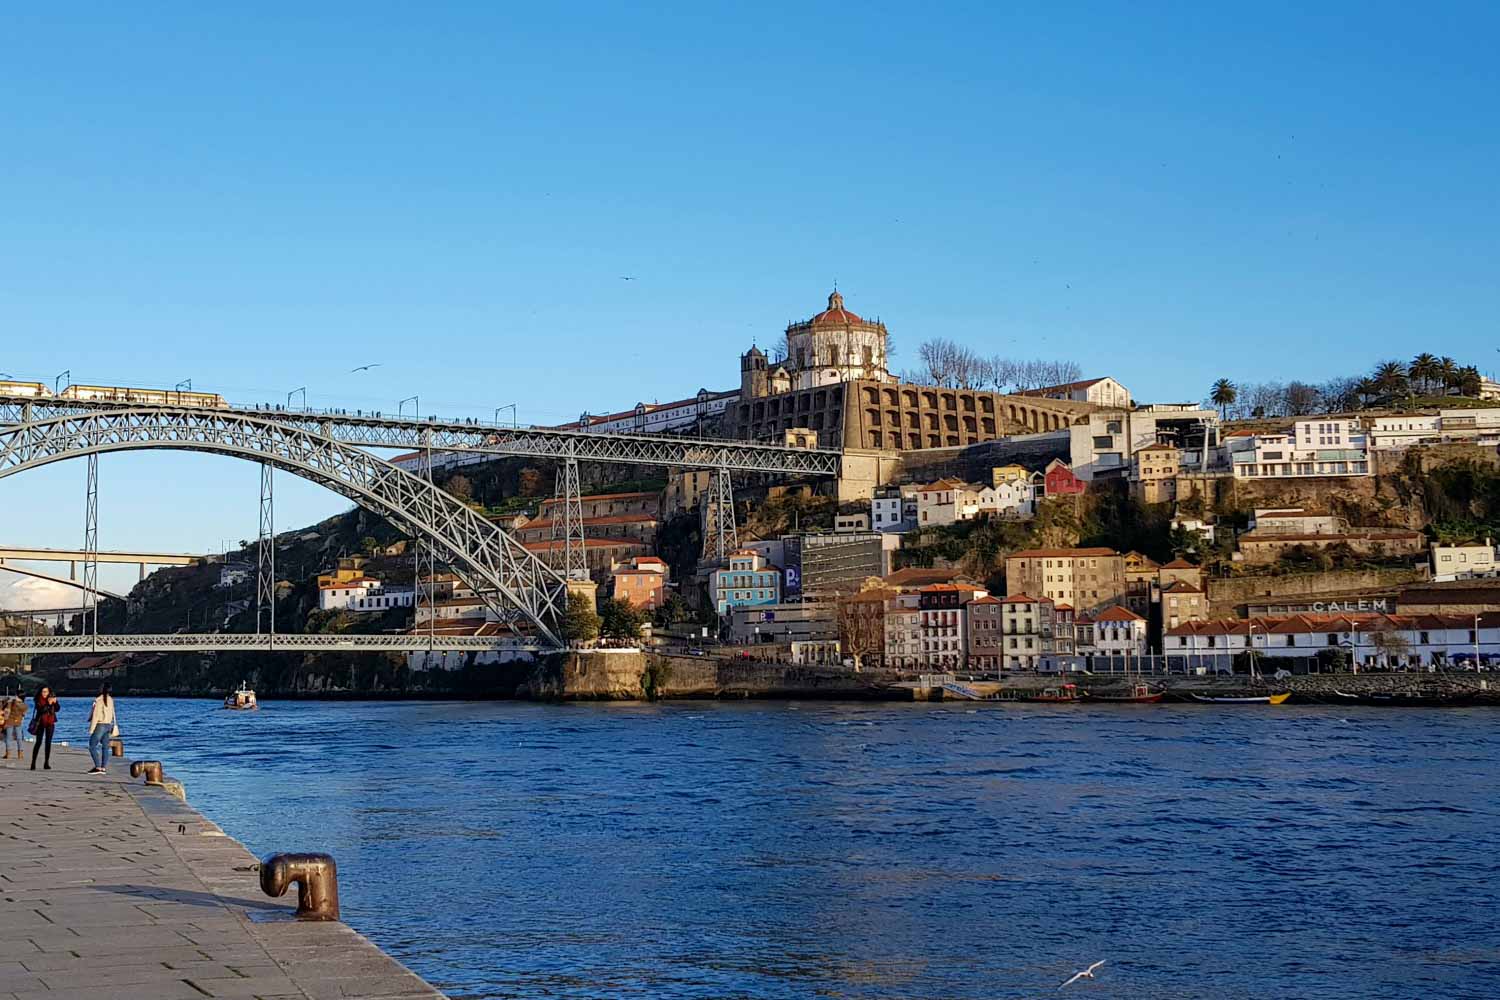 View across the River Douro from Porto to Vila Nova de Gaia - my pick of the top things to do in Porto with kids, discovering the family-friendly side to this lovely city in north Portugal